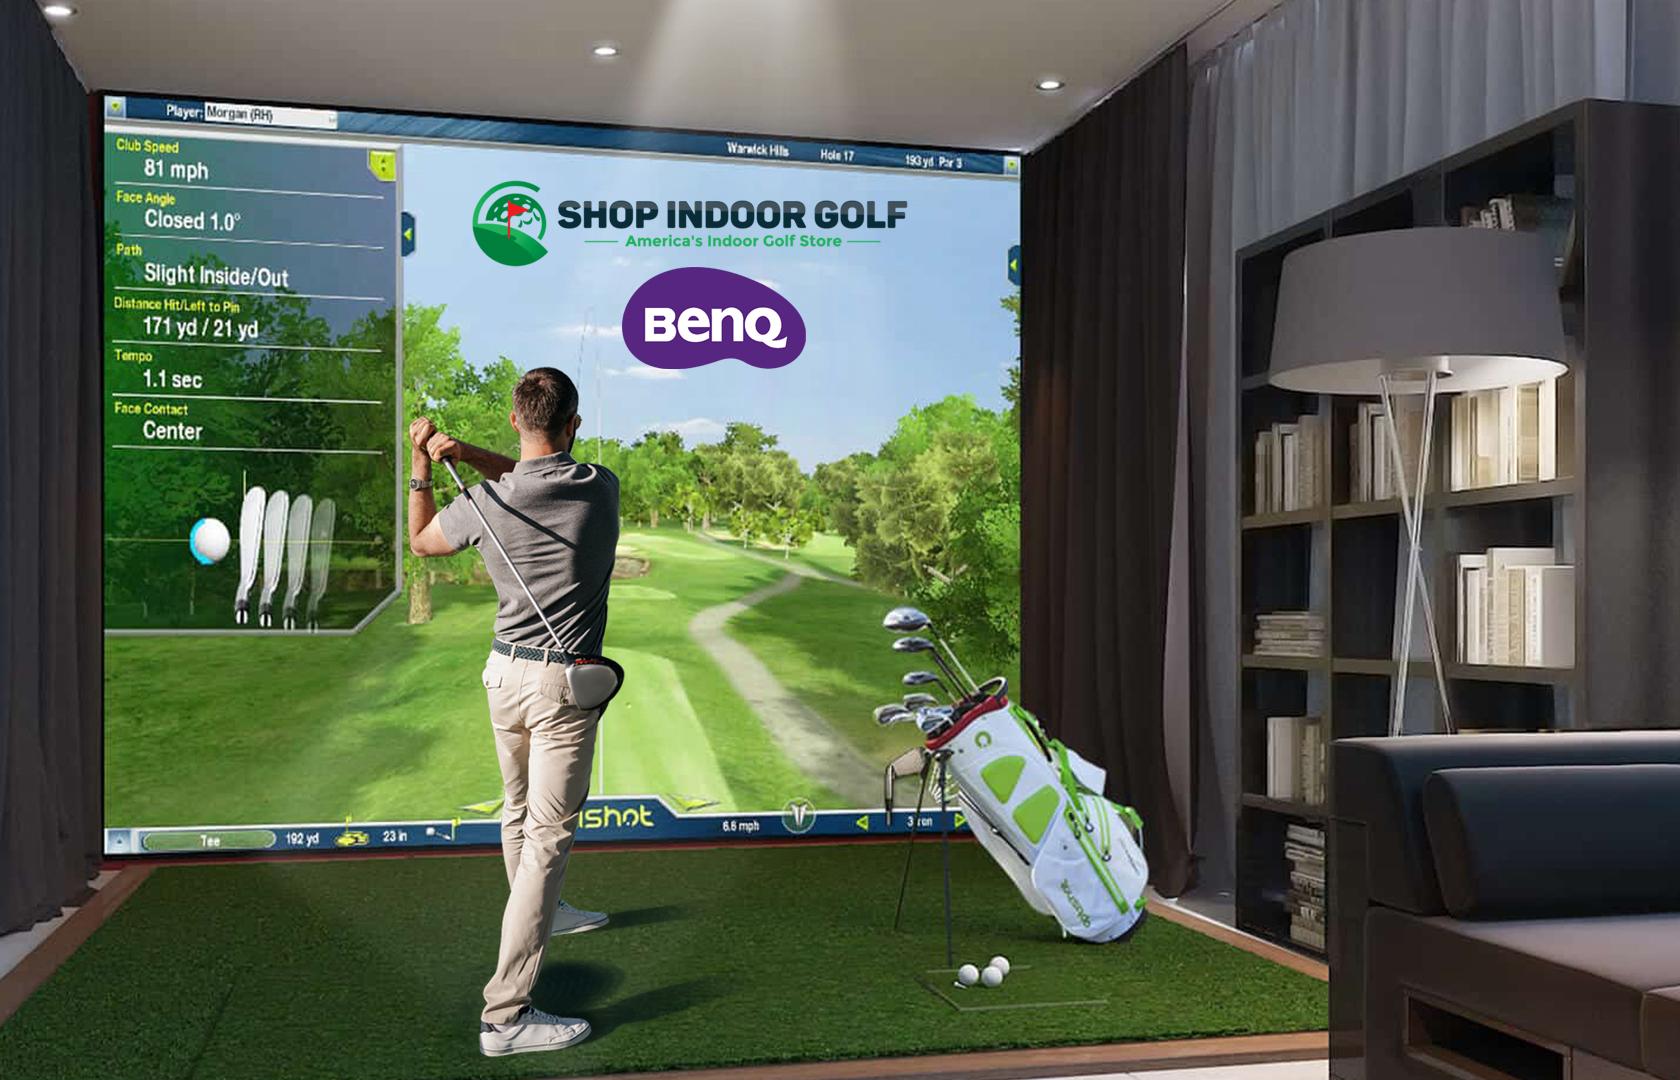 Golf Simulation Event; Launch of BenQ LU935ST Projector